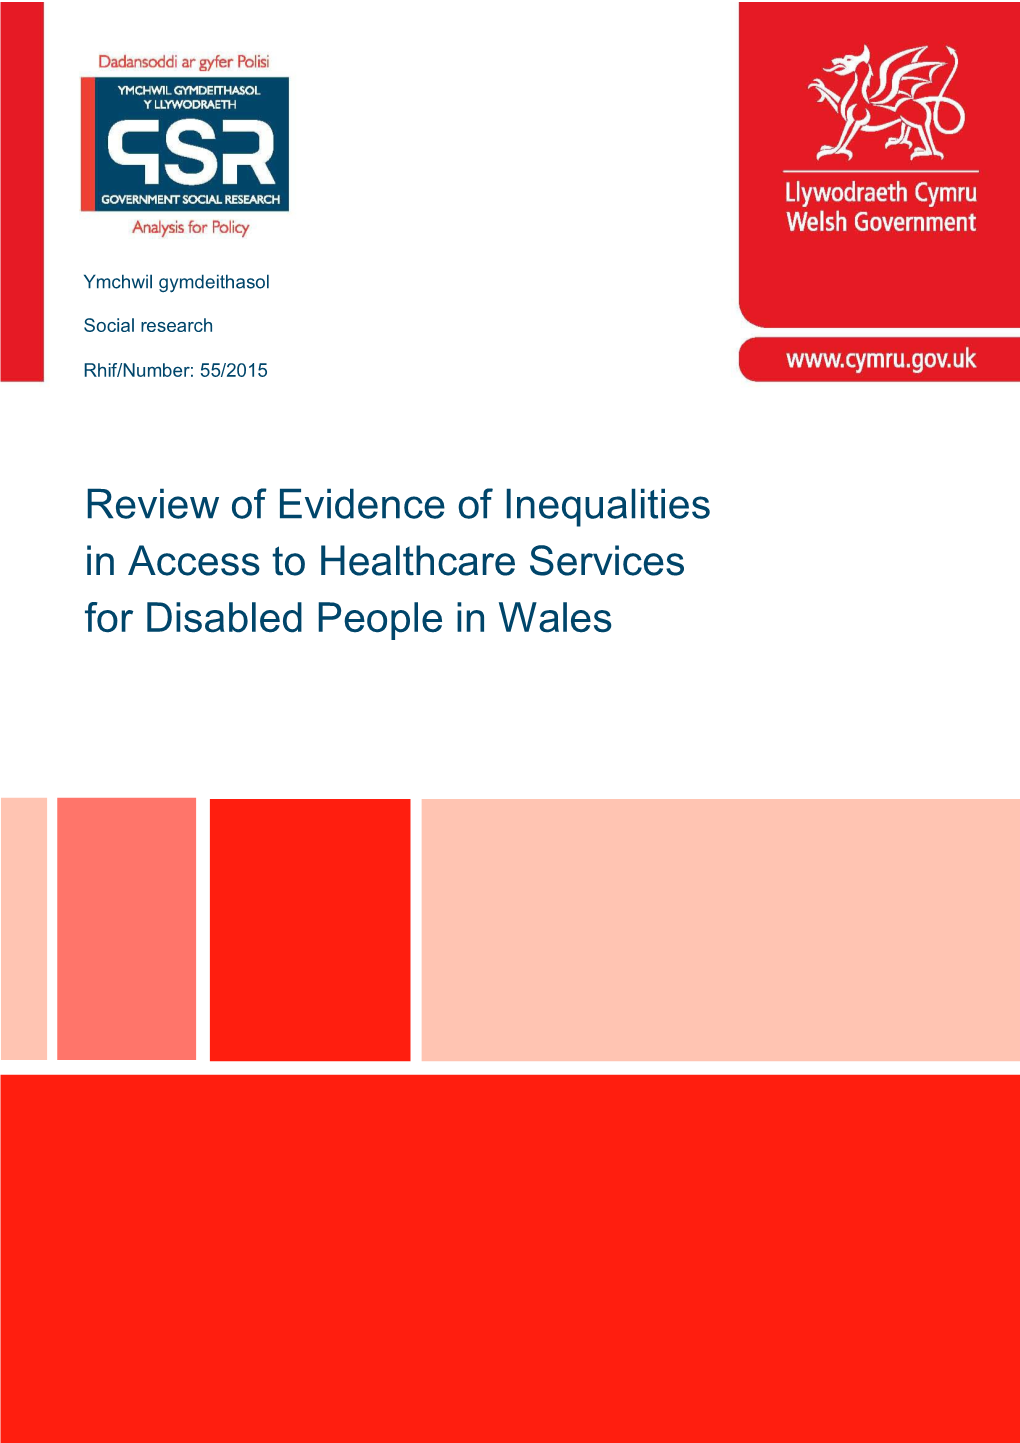 Review of Evidence of Inequalities in Access to Healthcare Services for Disabled People in Wales